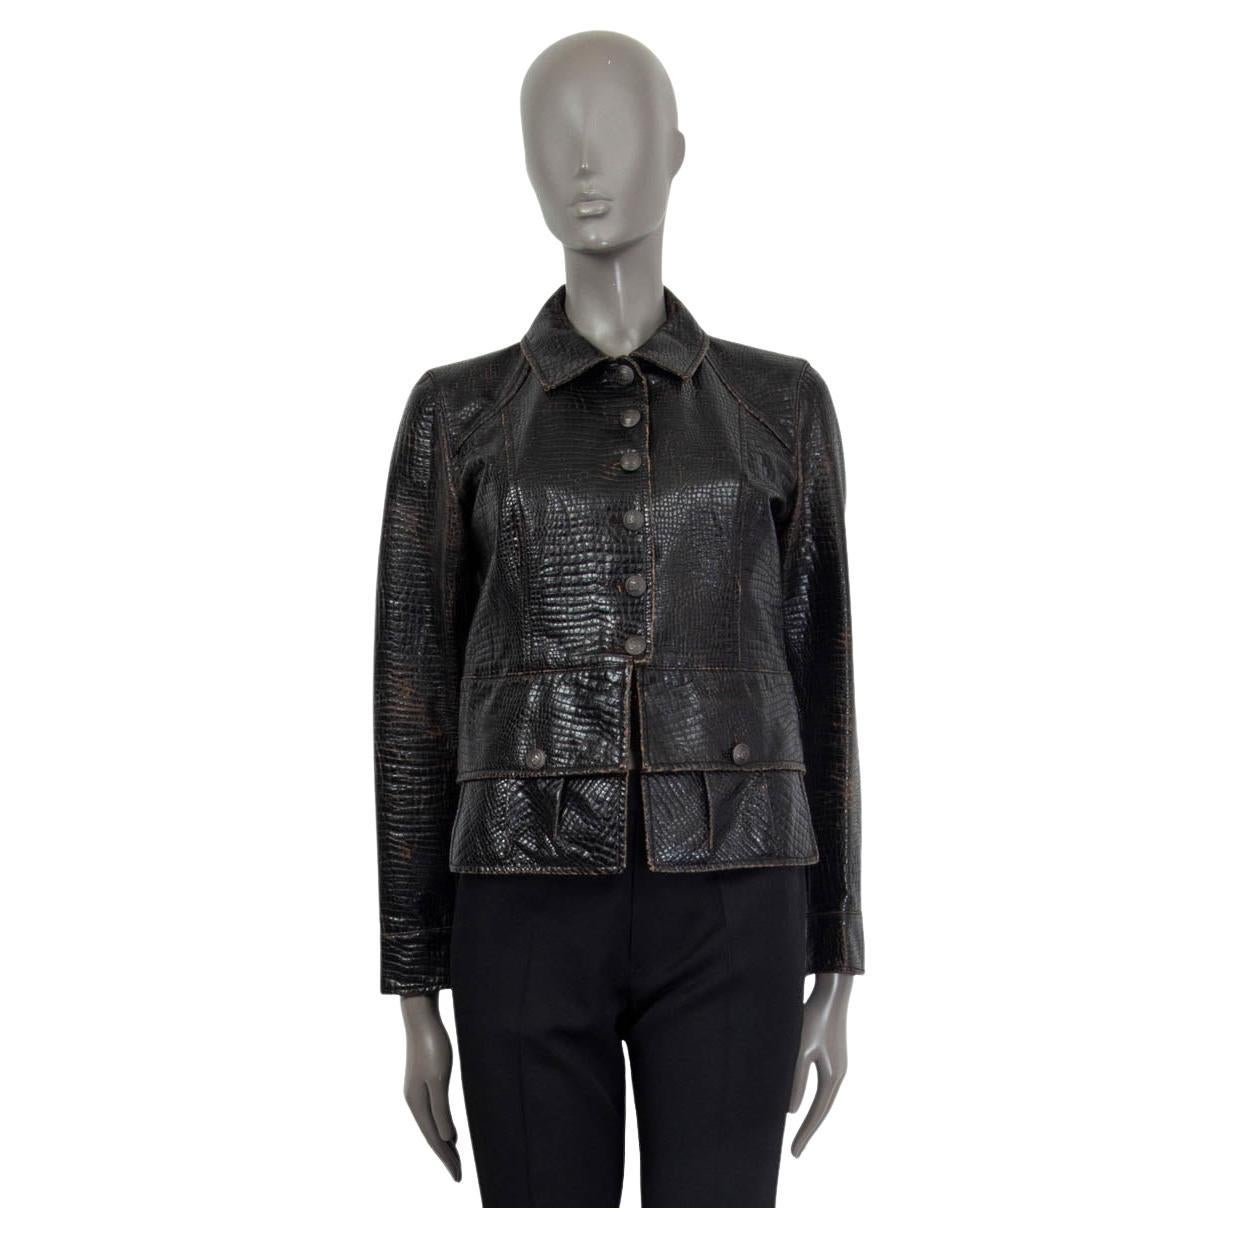 CHANEL dark brown 2003 CROC EMBOSSED FAUX LEATHER Jacket 38 S 03A